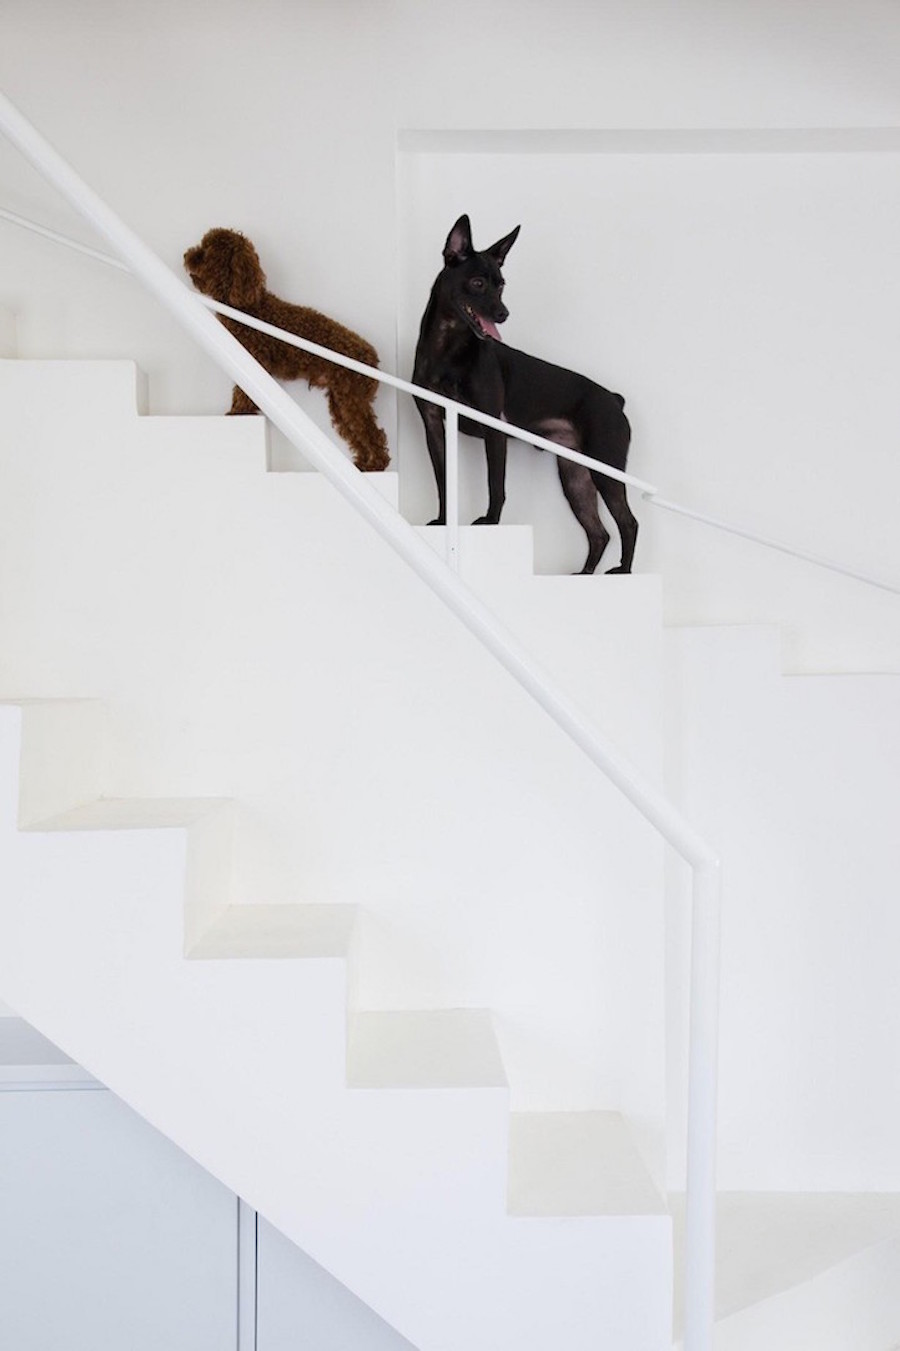 Staircase Designed for Small Pets4